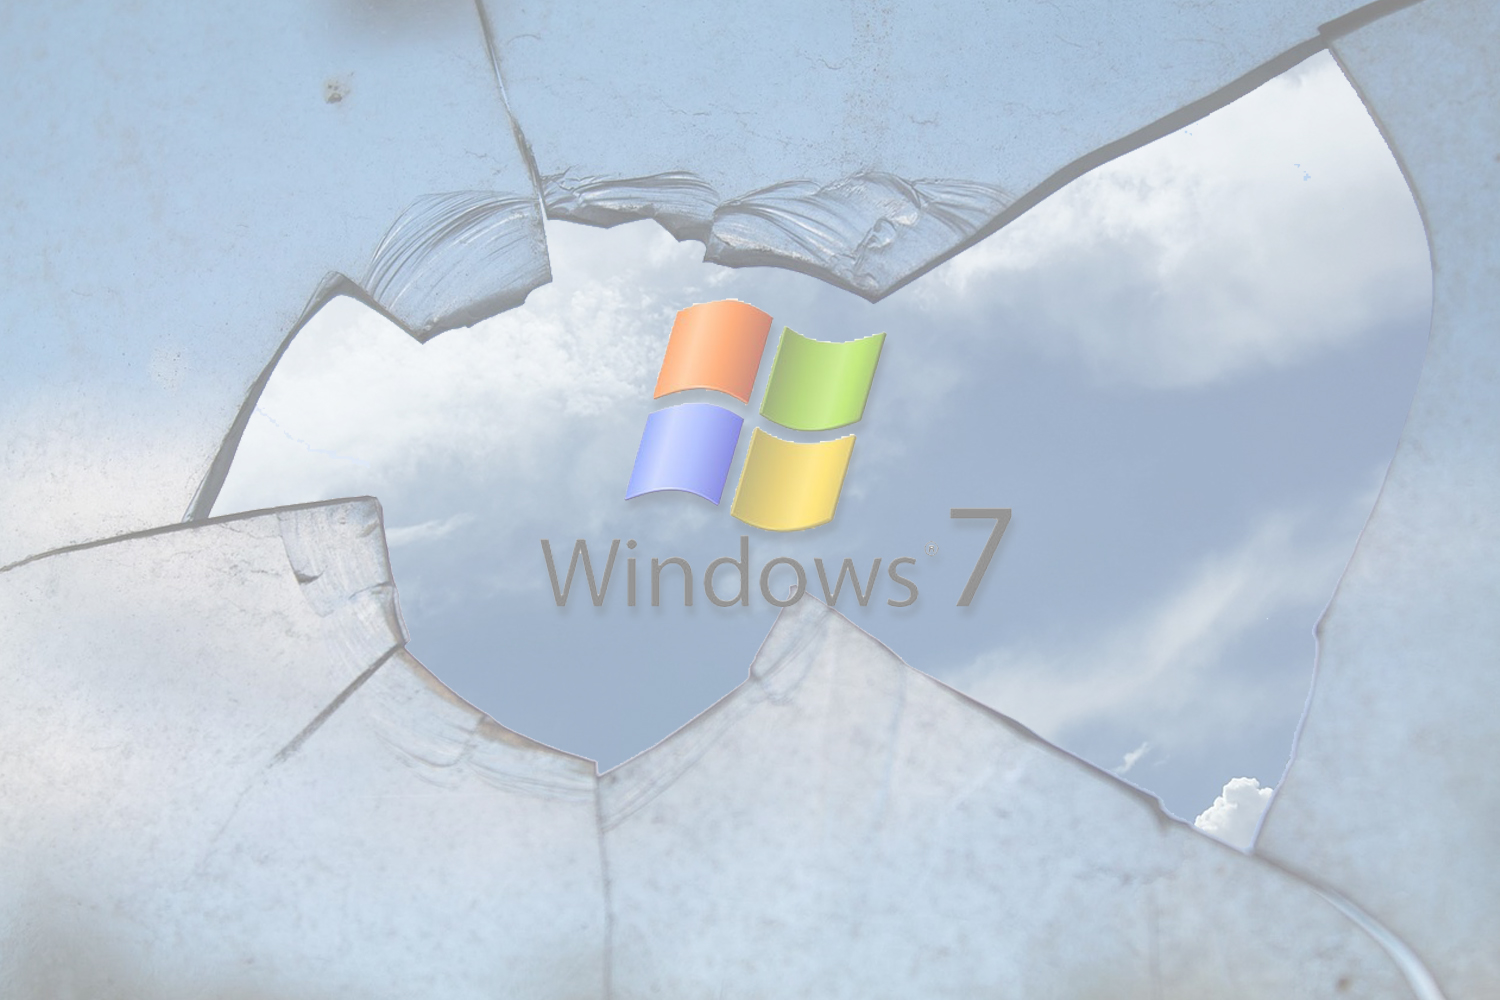 Windows 7 End of Support: What You Need to Know